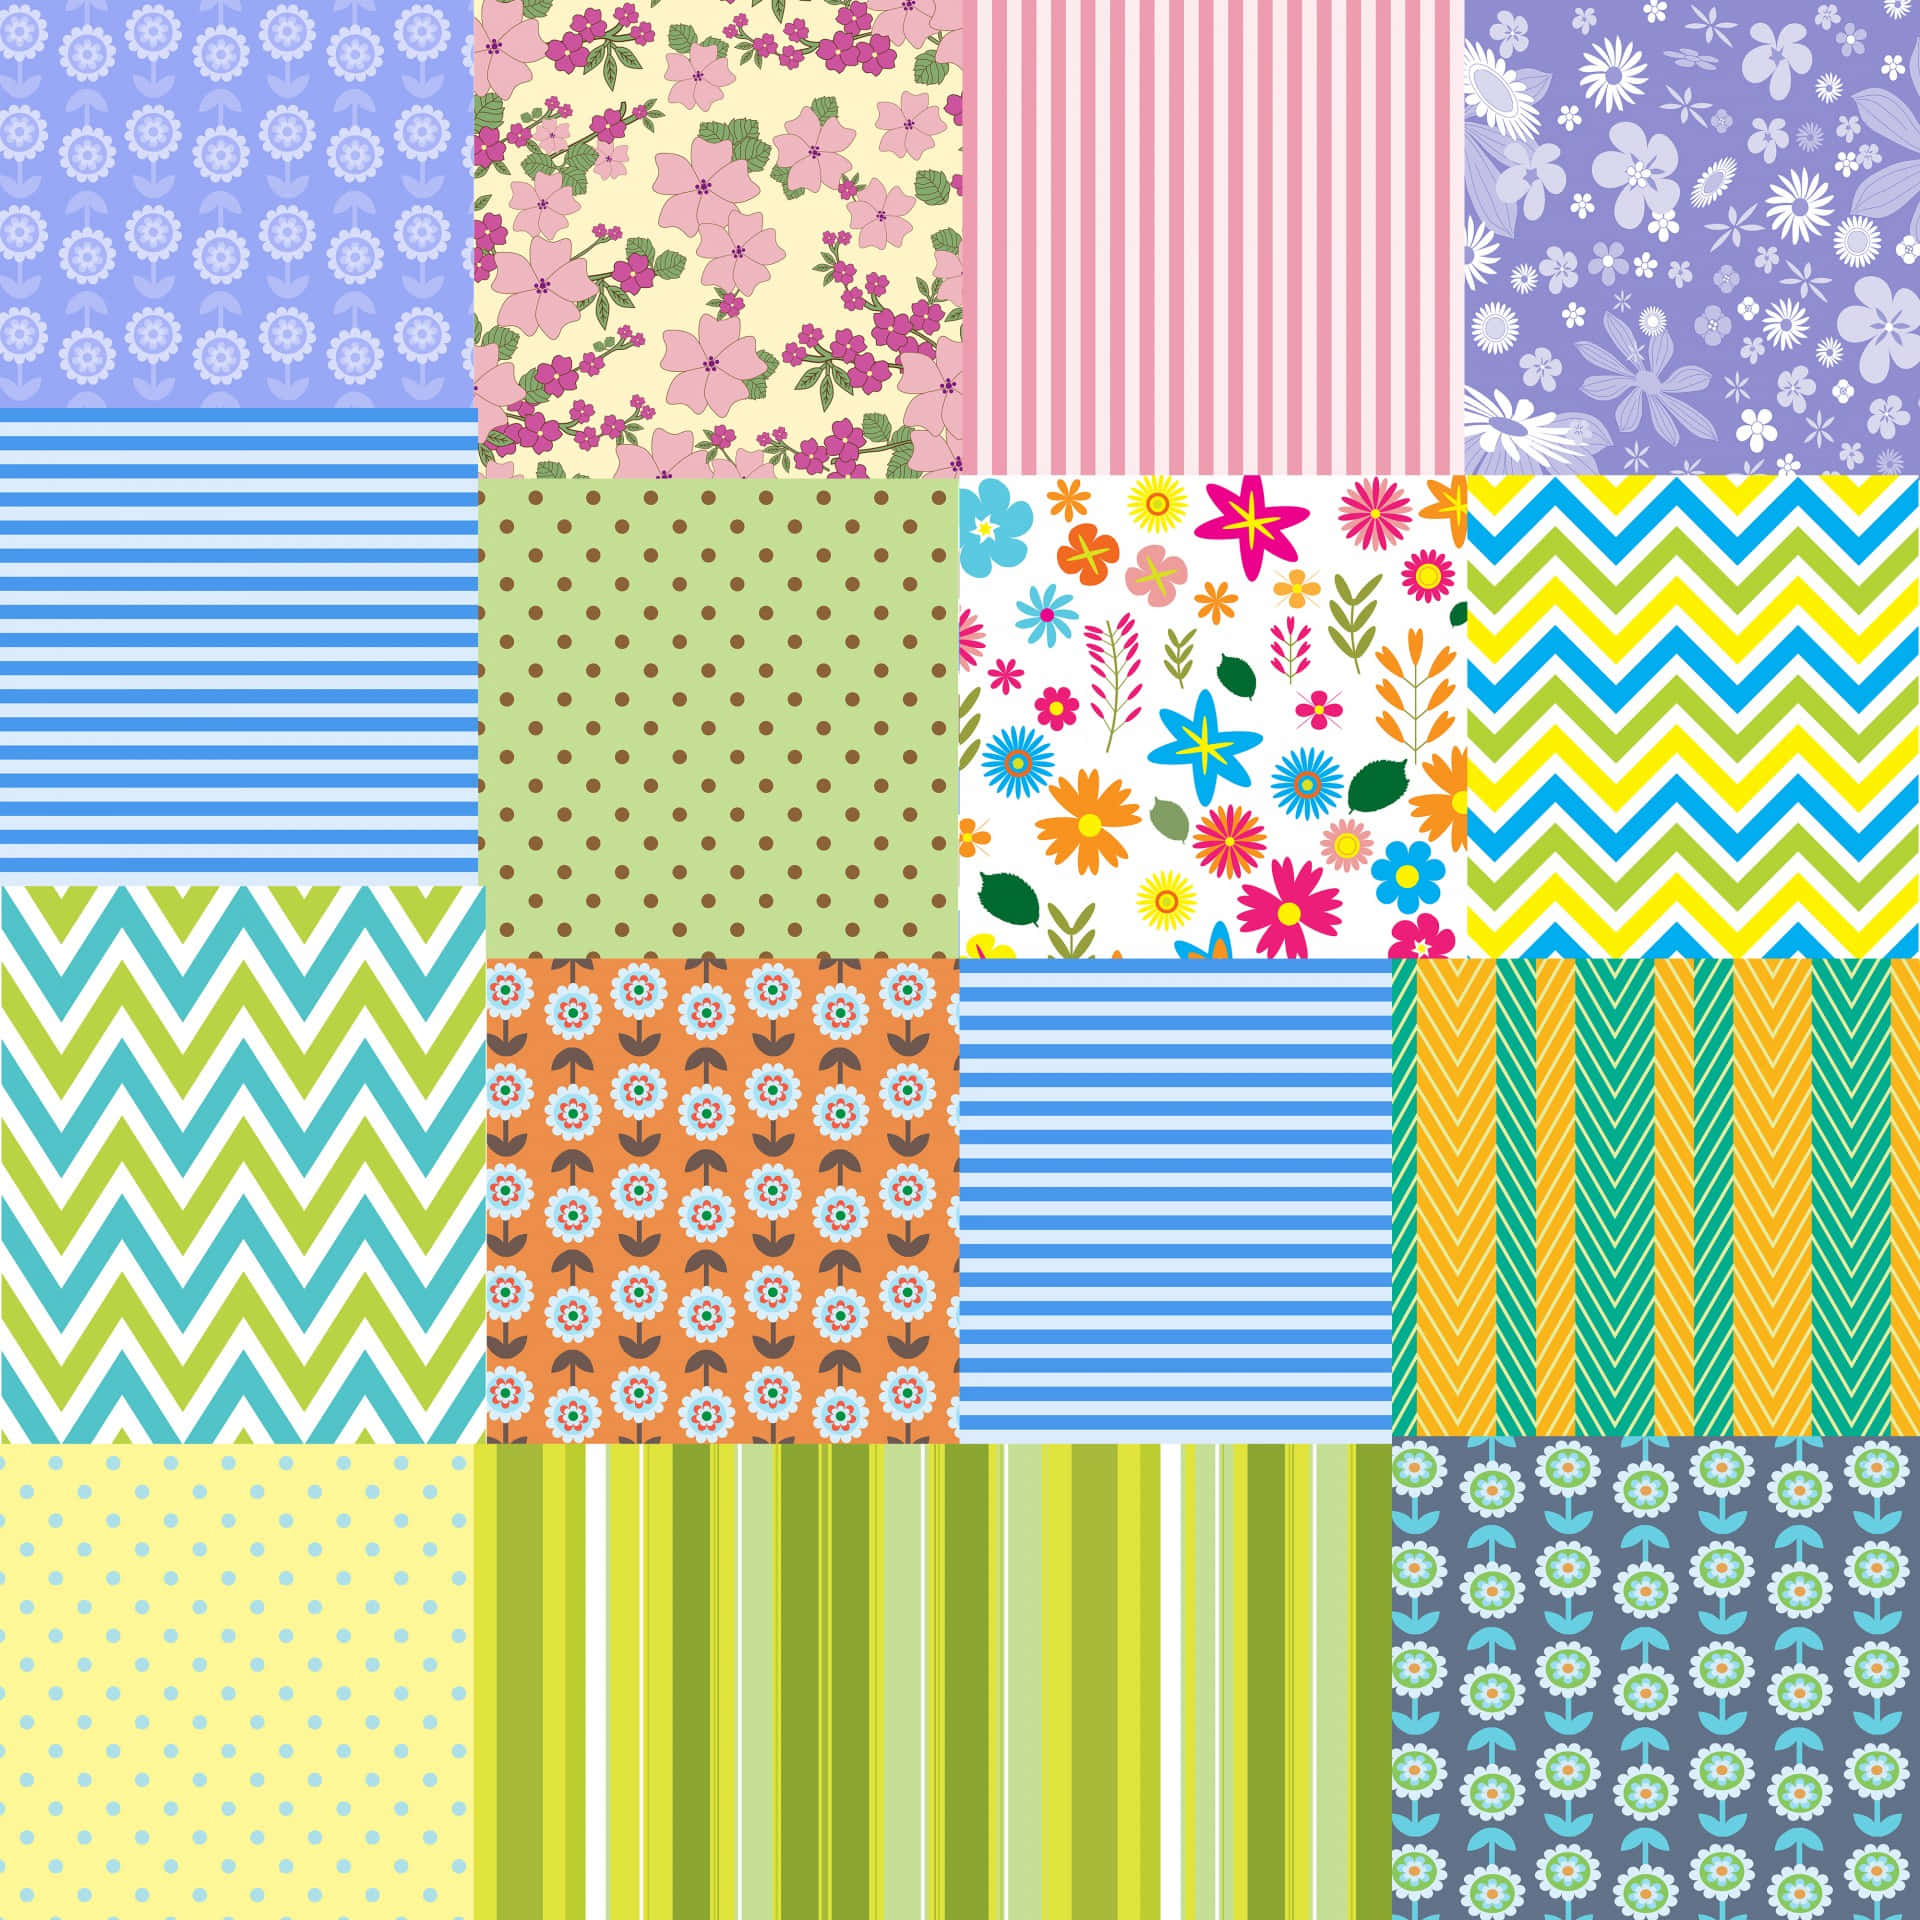 A Collection Of Different Patterns And Colors Wallpaper